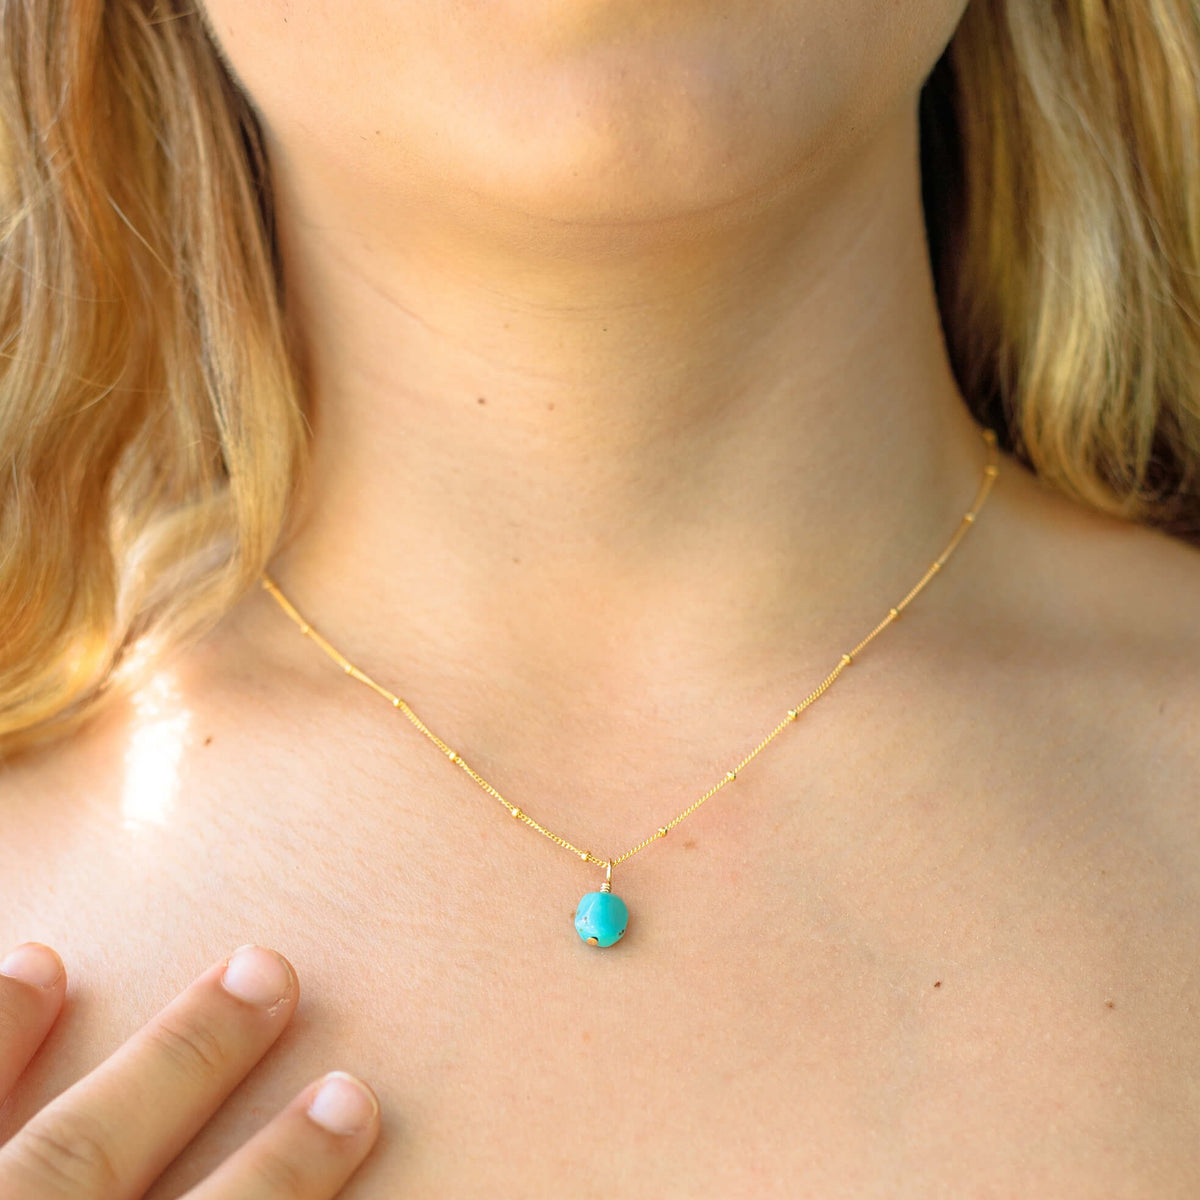 Raw Crystal Pendant Necklace - Turquoise - 14K Gold Fill Satellite - Luna Tide Handmade Jewellery